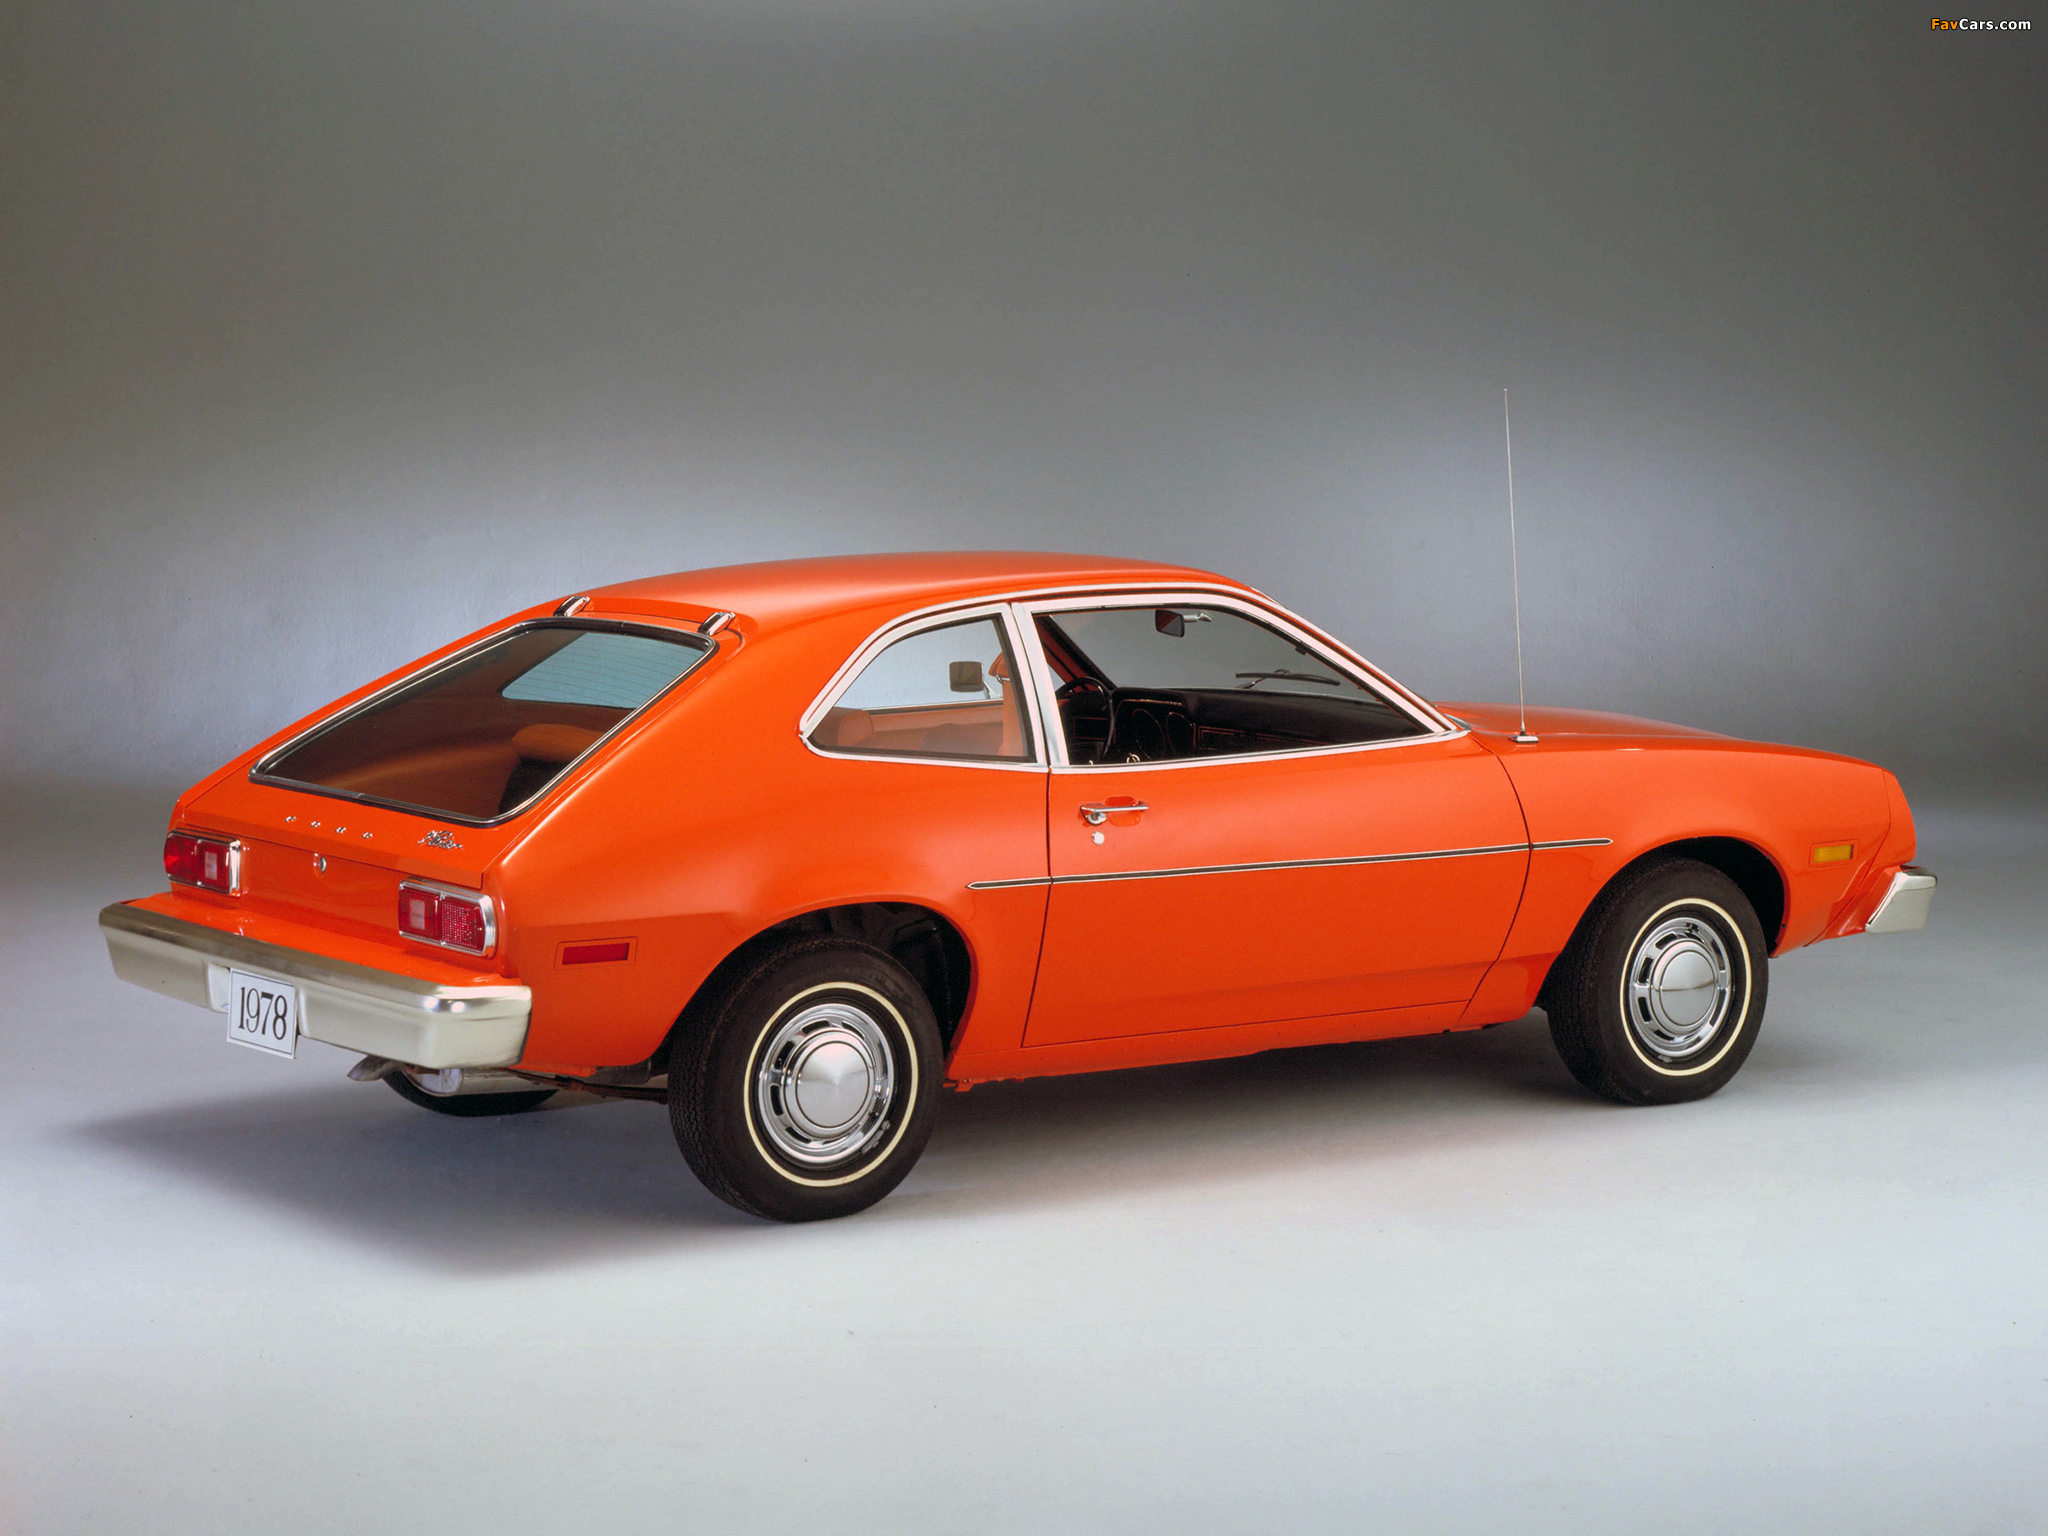 Ford Pinto wallpapers. 